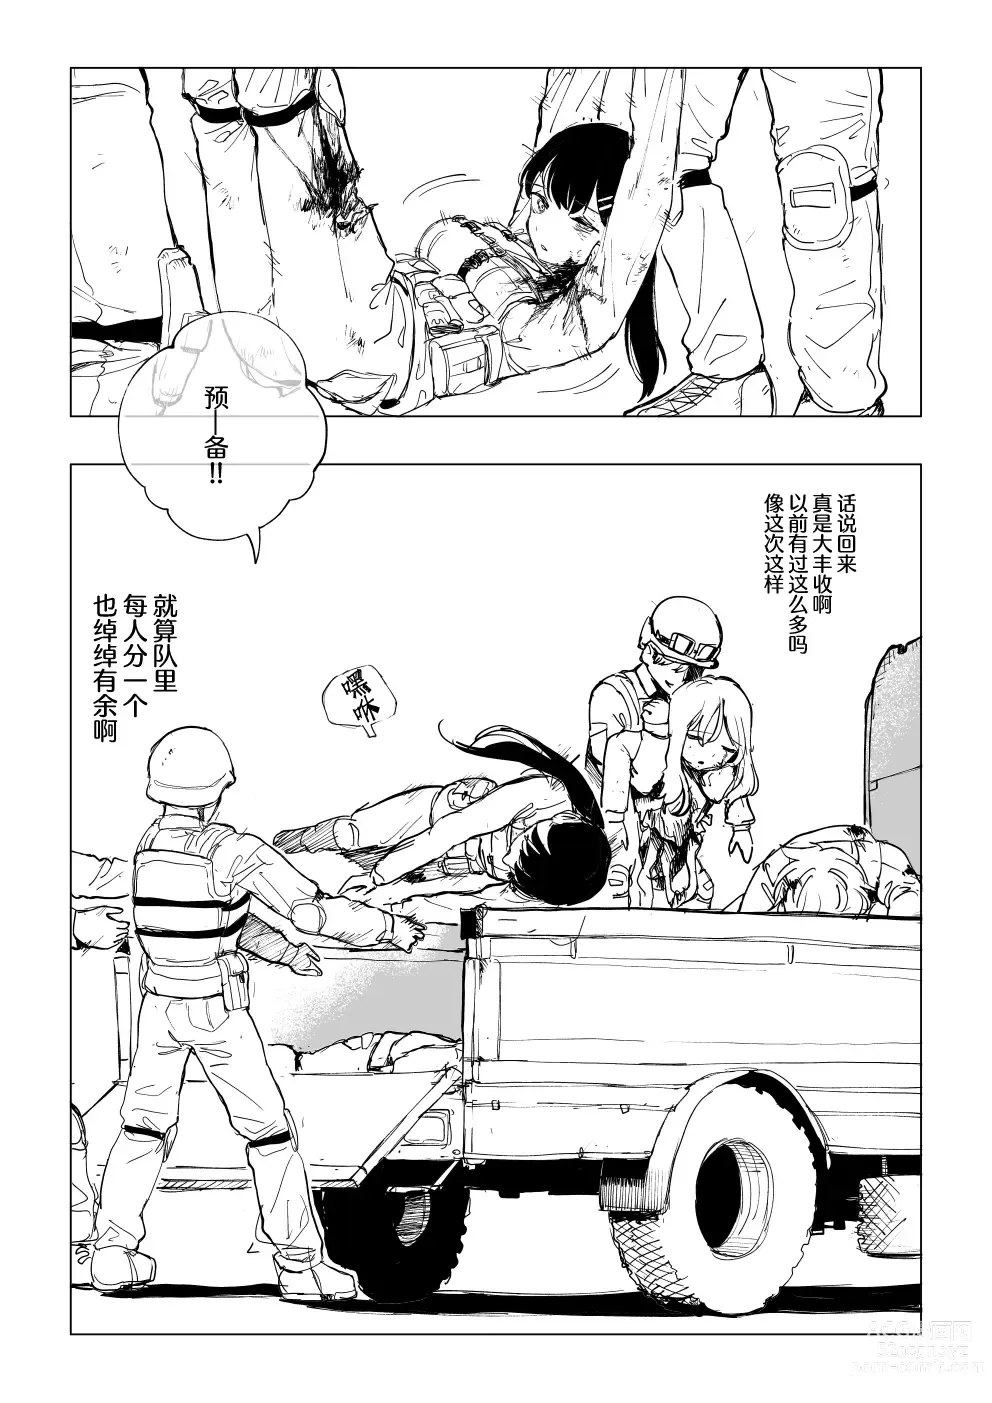 Page 2 of doujinshi Fallen on the Battlefield - The Aftermath